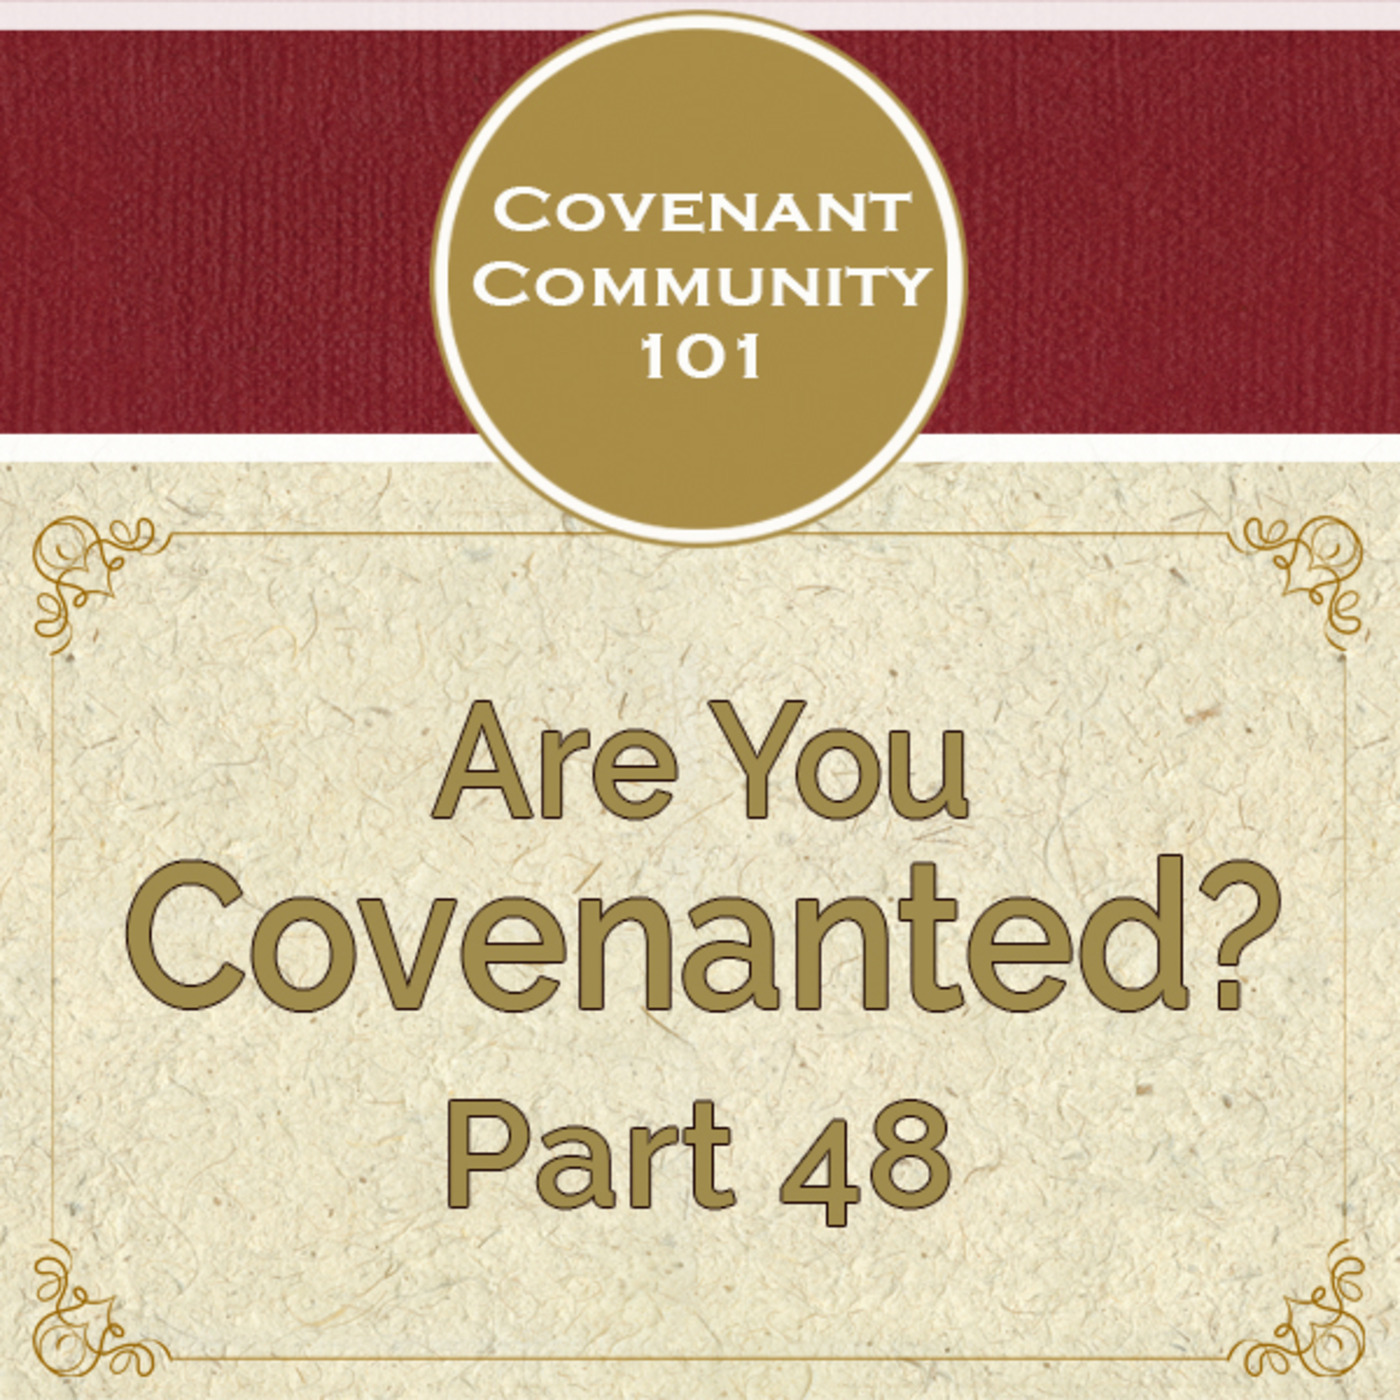 Covenant Community 101: Are You Covenanted? Part 48